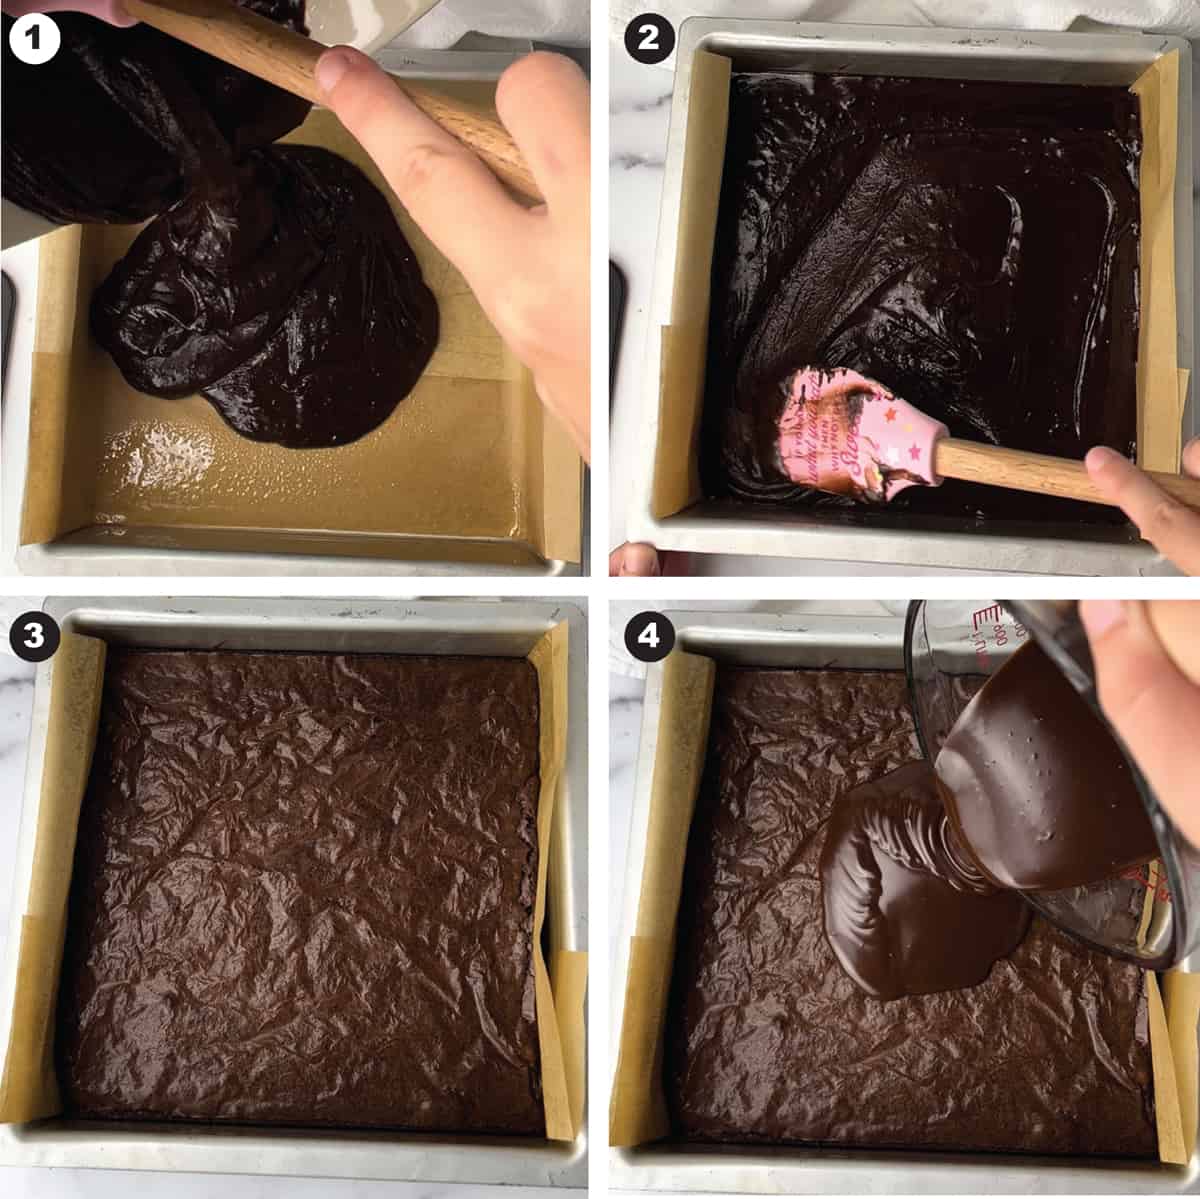 How to make cosmic brownies in four steps.